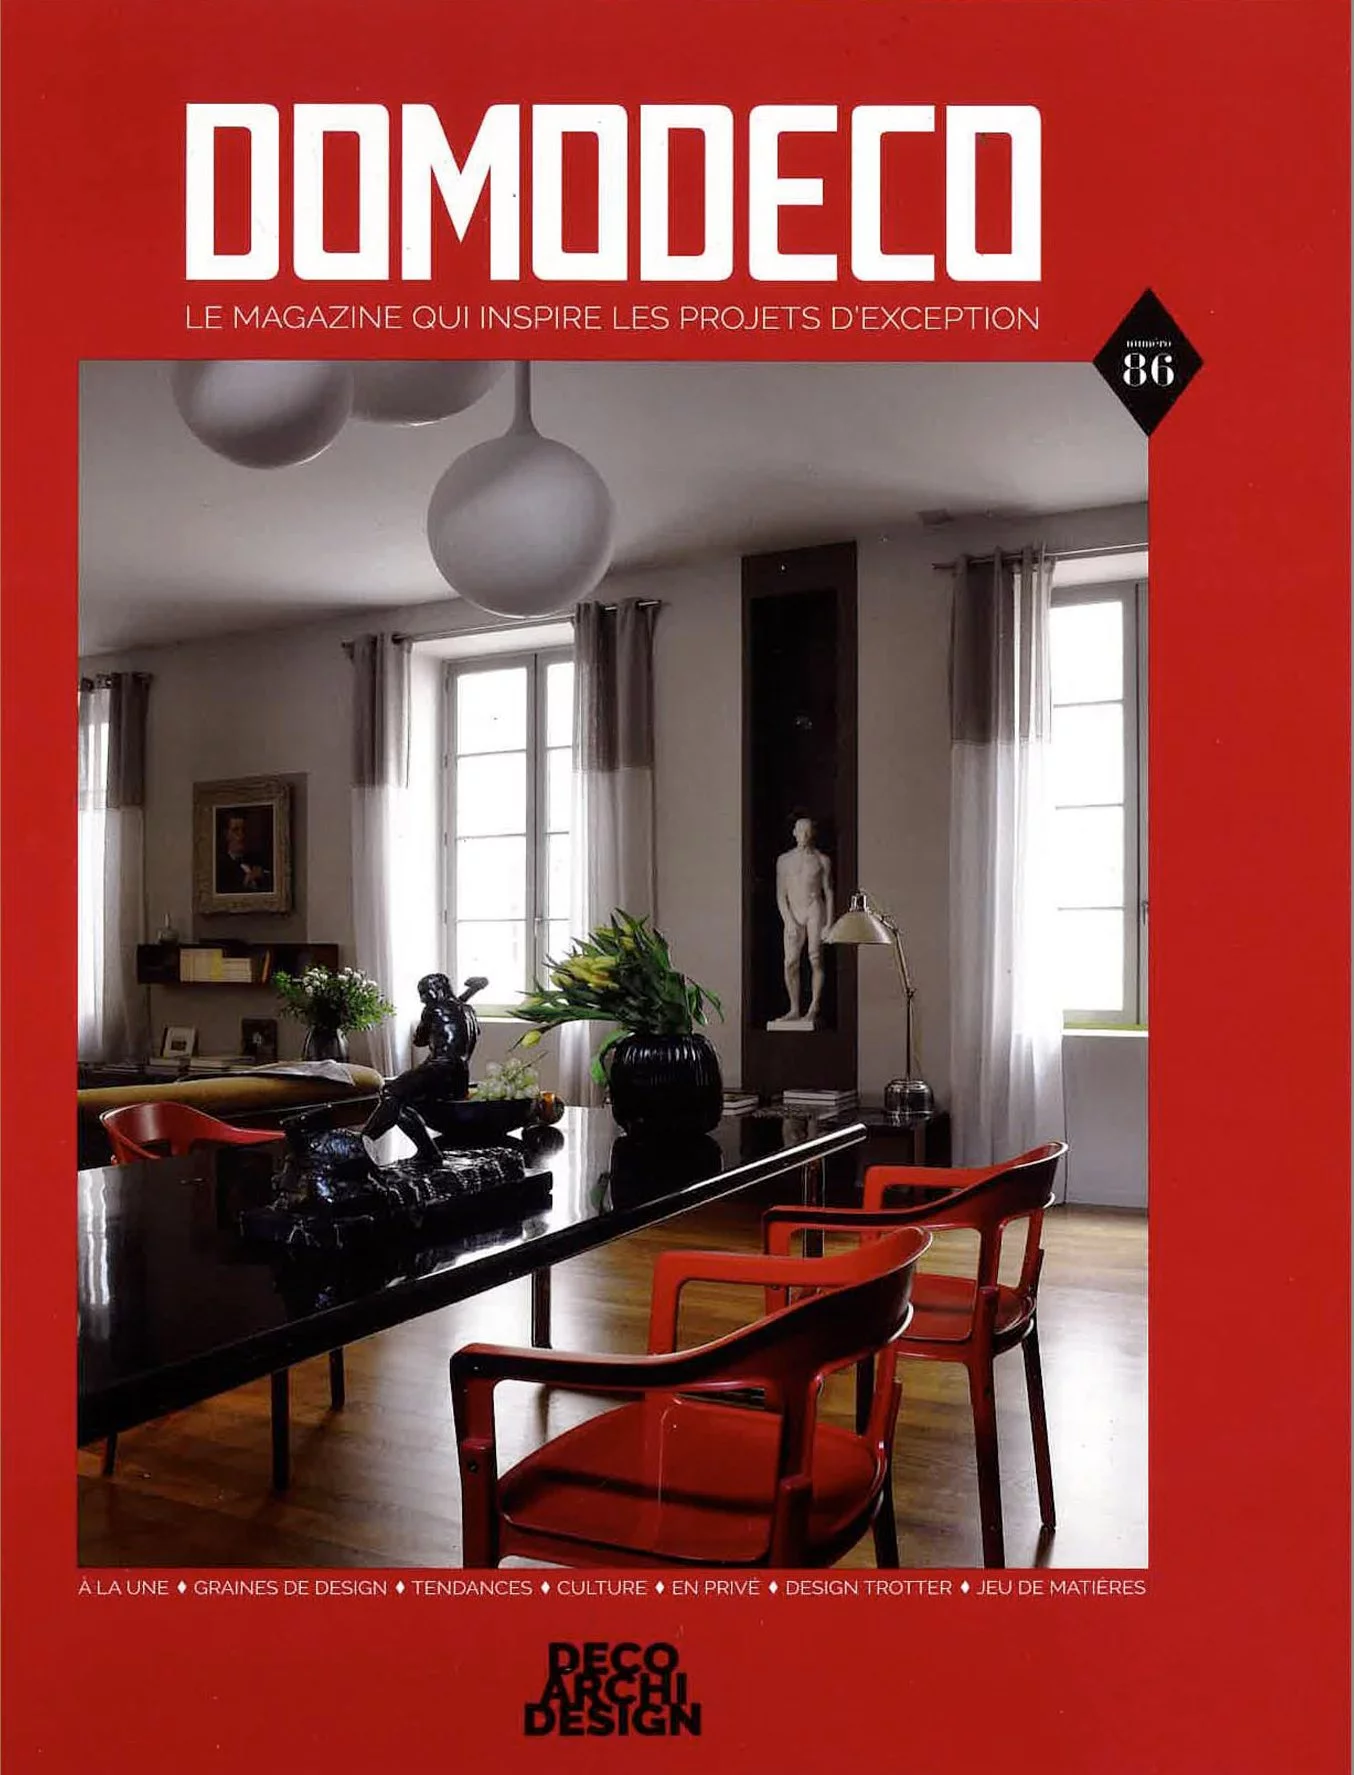 DOMODECO-APPARTEMENT-GALERIE